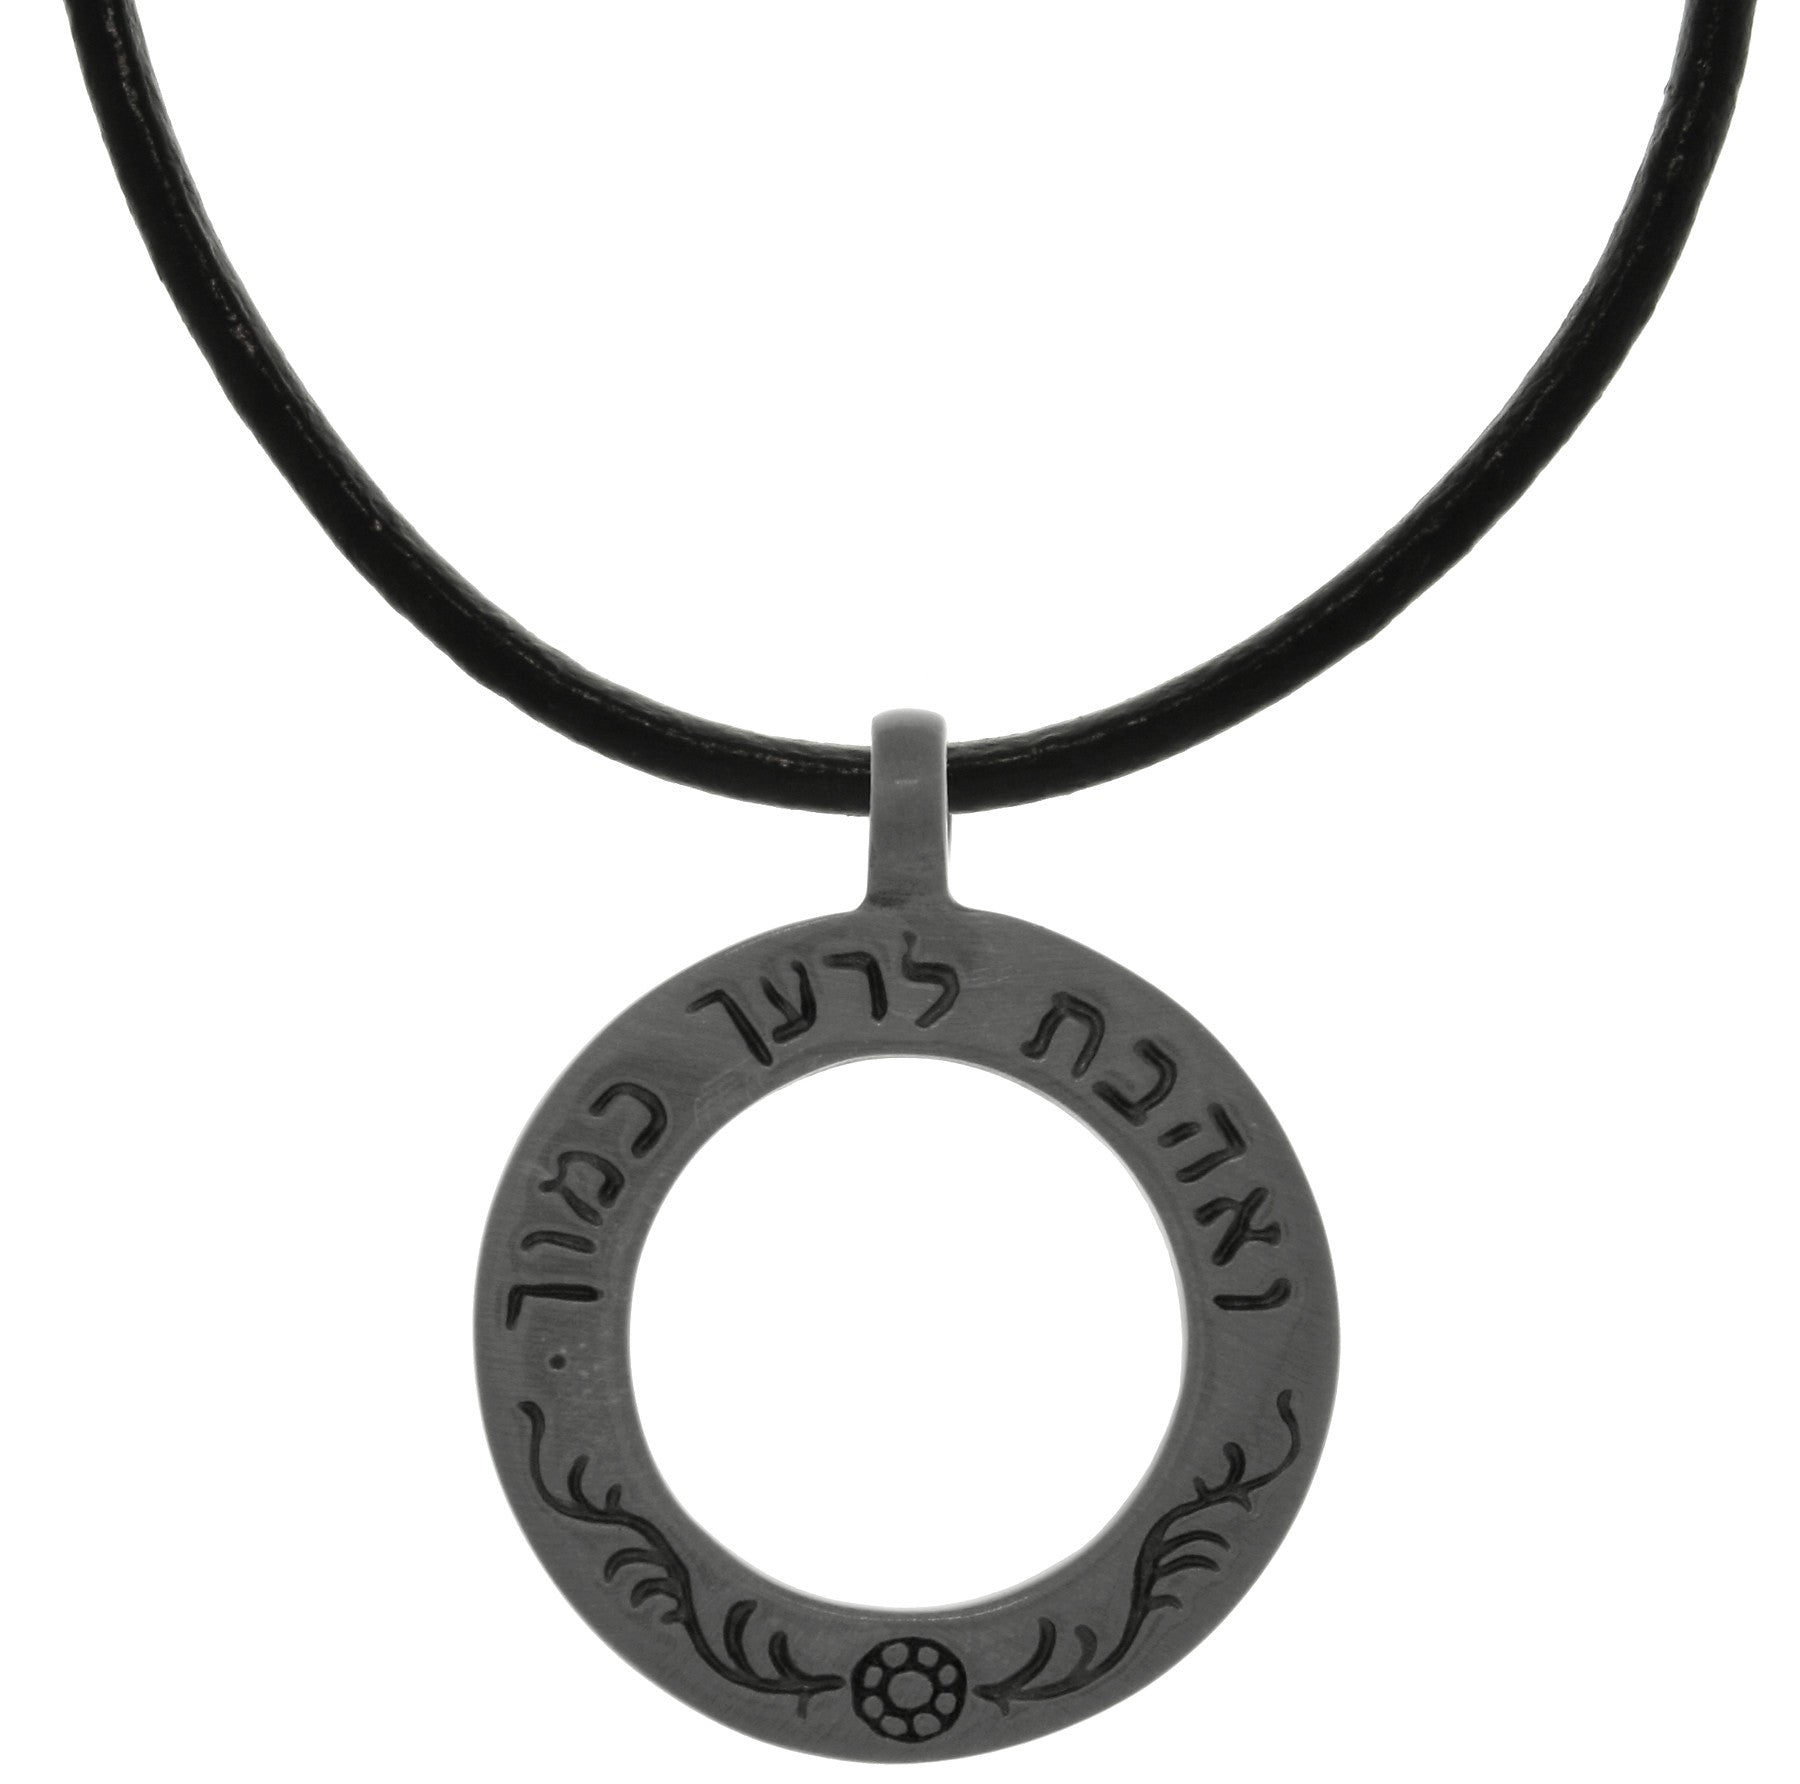 Jewelry Trends Pewter Round Pendant Love Your Friends Like You Love Yourself in Hebrew on Leather Necklace